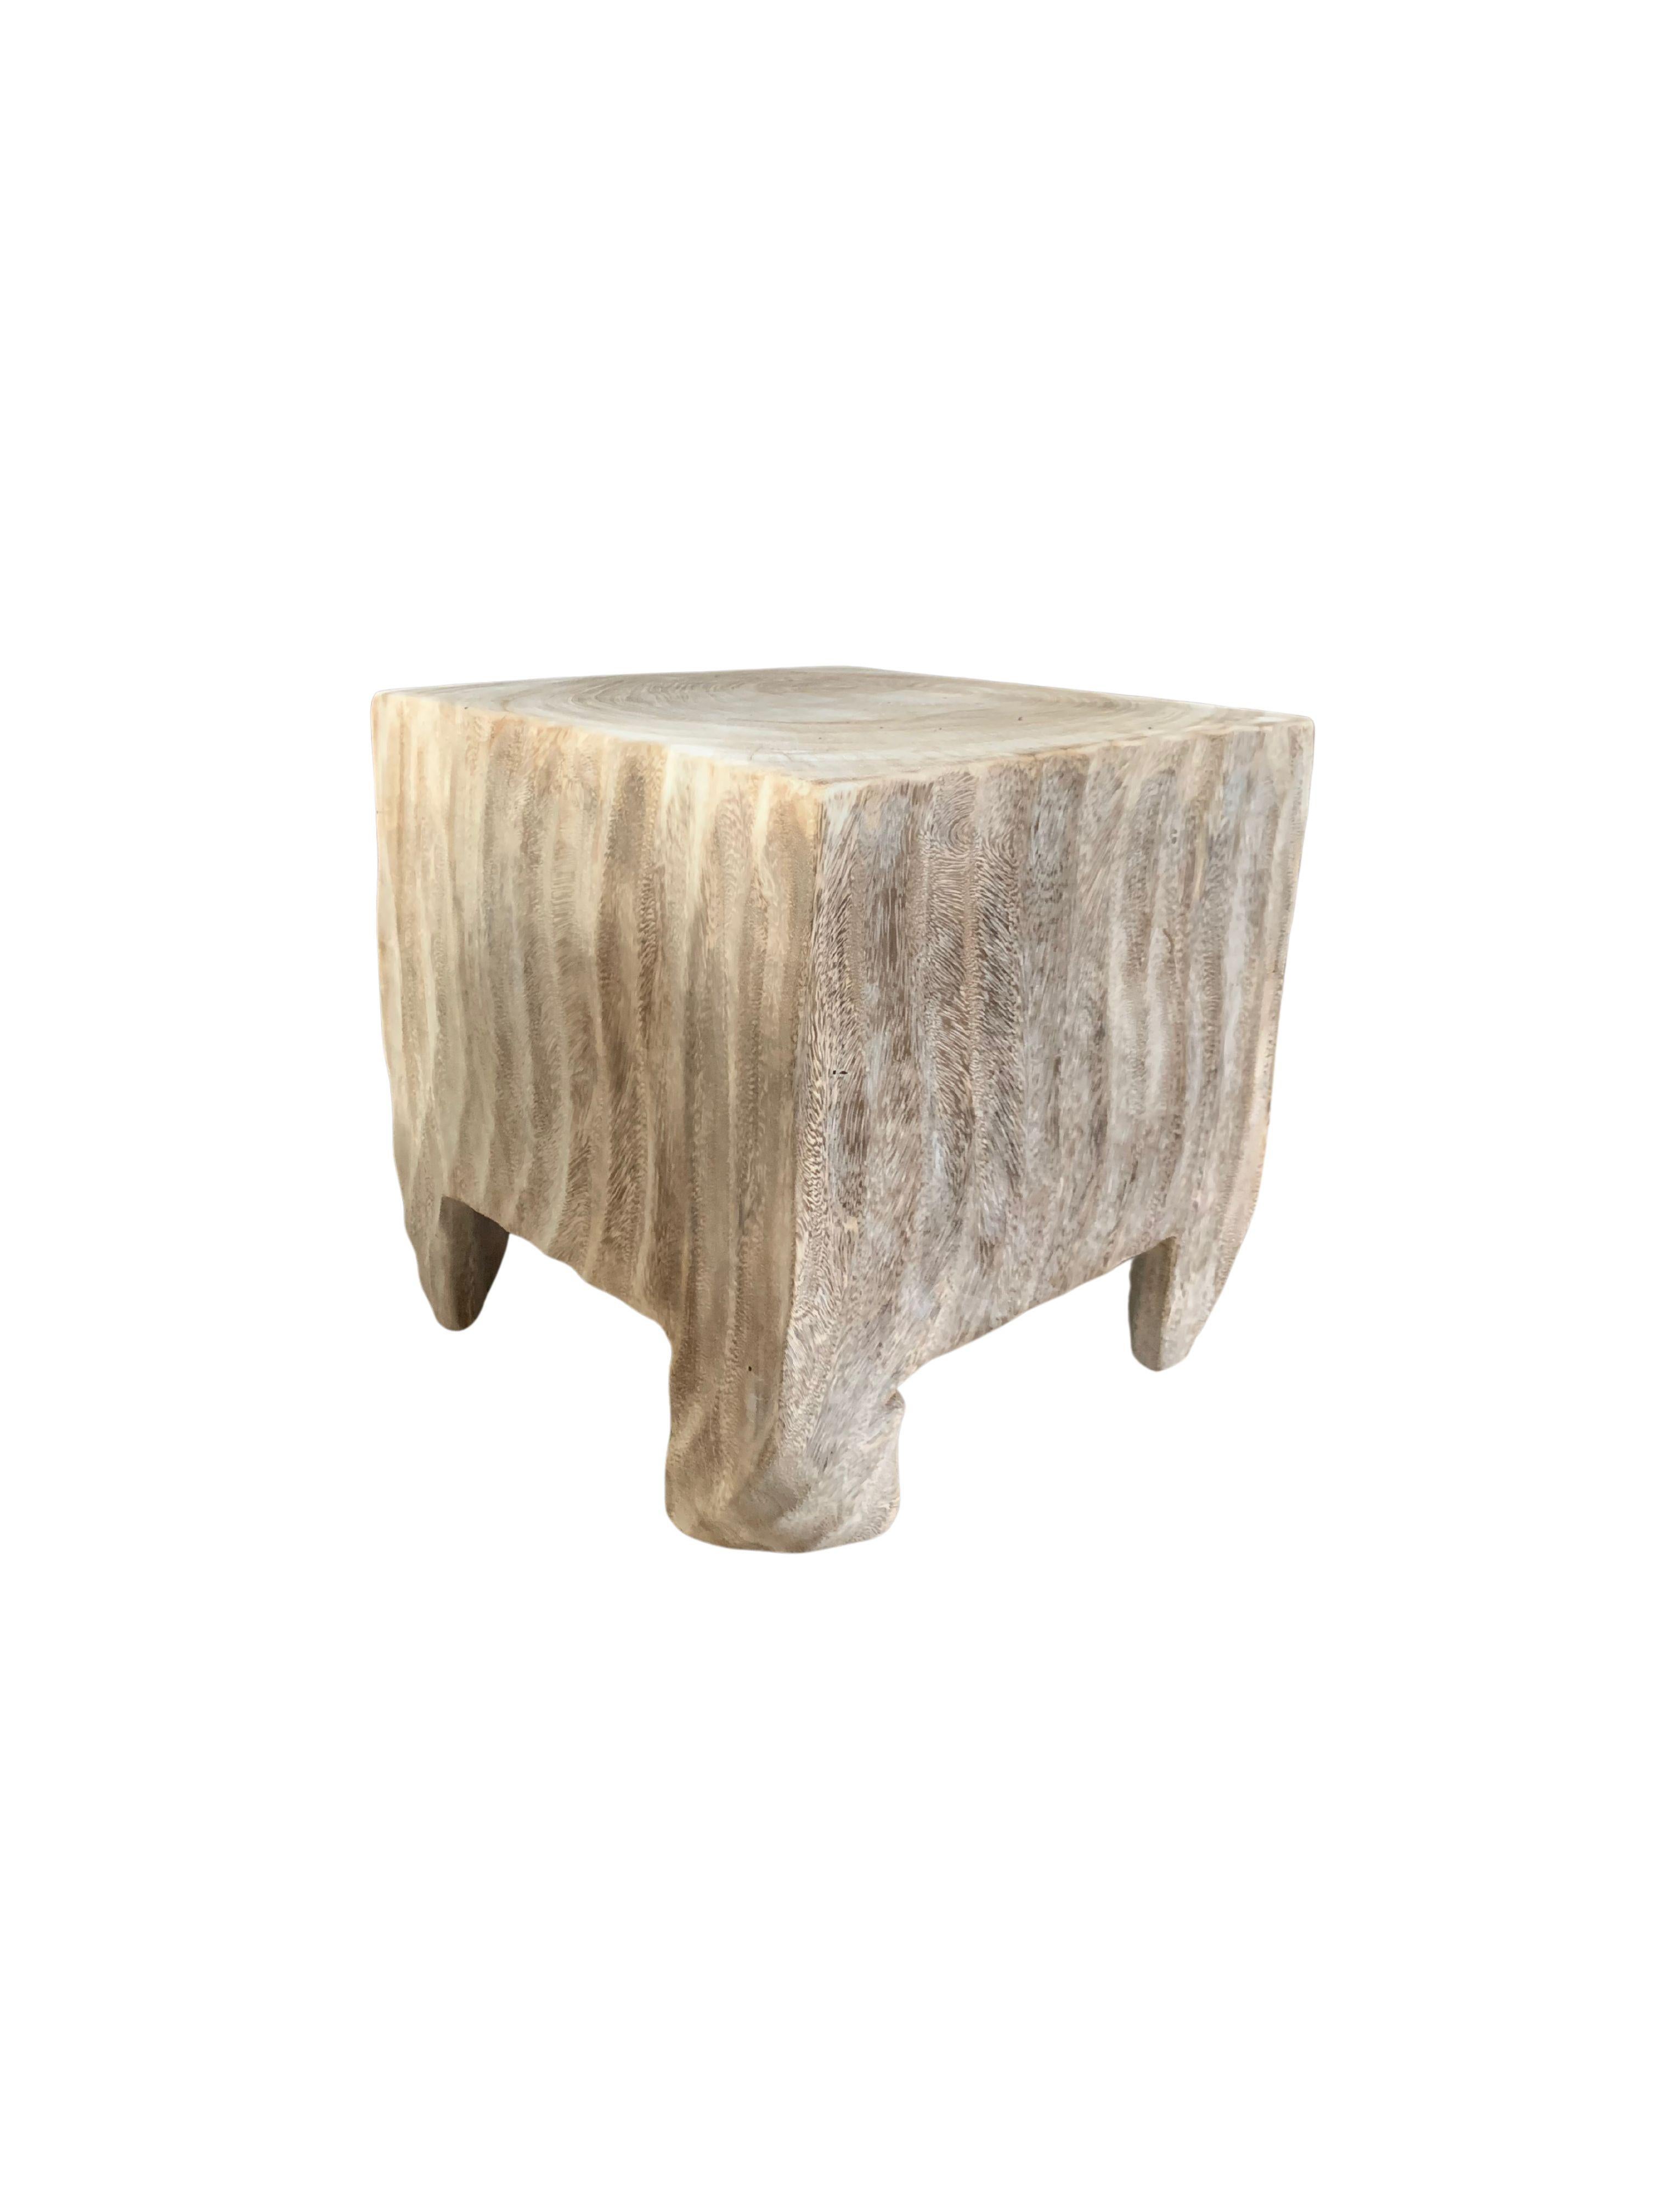 Indonesian Sculptural Side Table Mango Wood Sanded Finish For Sale